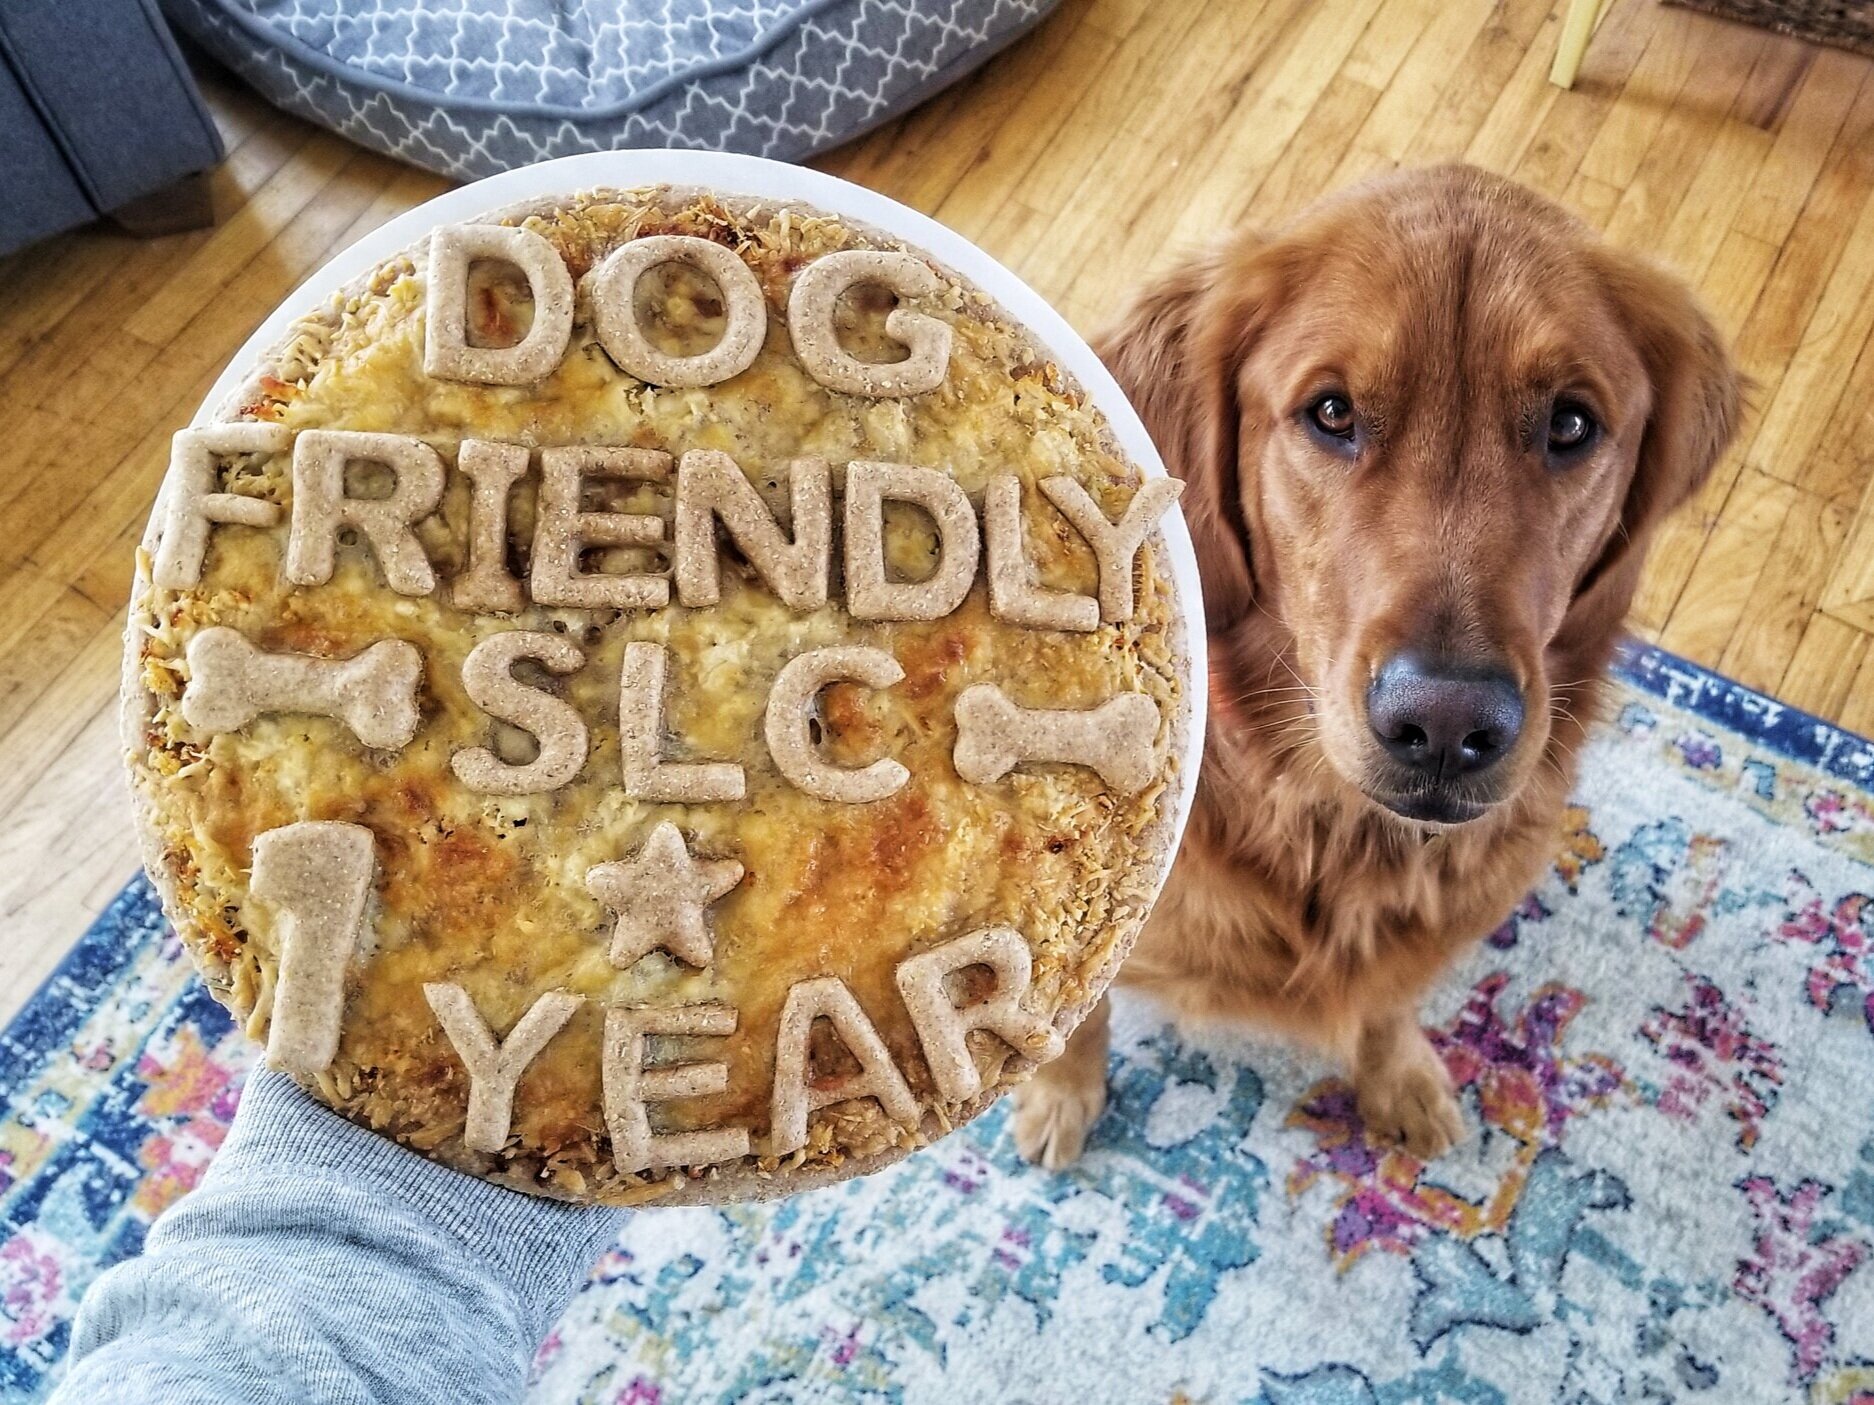 A person holds a dog pizza that reads “Dog Friendly SLC 1 year” in the foreground while a golden retriever stares up at the pizza in the background